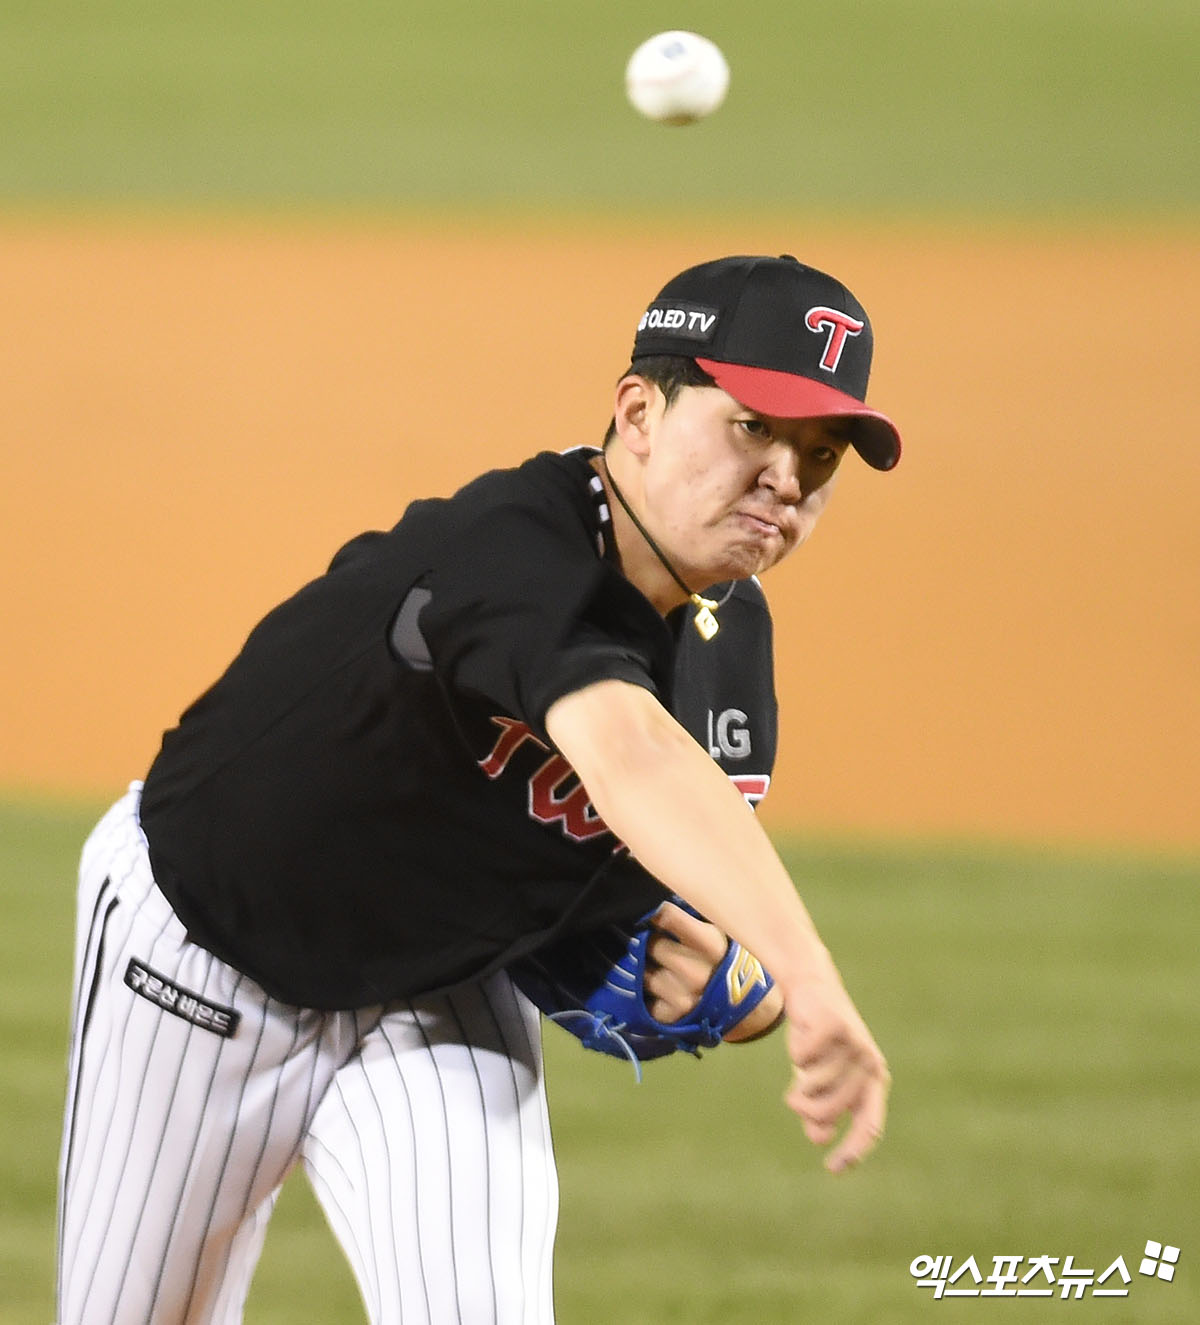 LG Twins and Doosan Bears semi-playoff first-round match at the 2020 Shinhan Bank SOL Postseason held at Jamsil-dongBaseball Park in Songpa-gu, Seoul on the afternoon of the 4th, and LG Cole Hamels Lee Min-ho are throwing the ball vigorously at the end of the first inning.